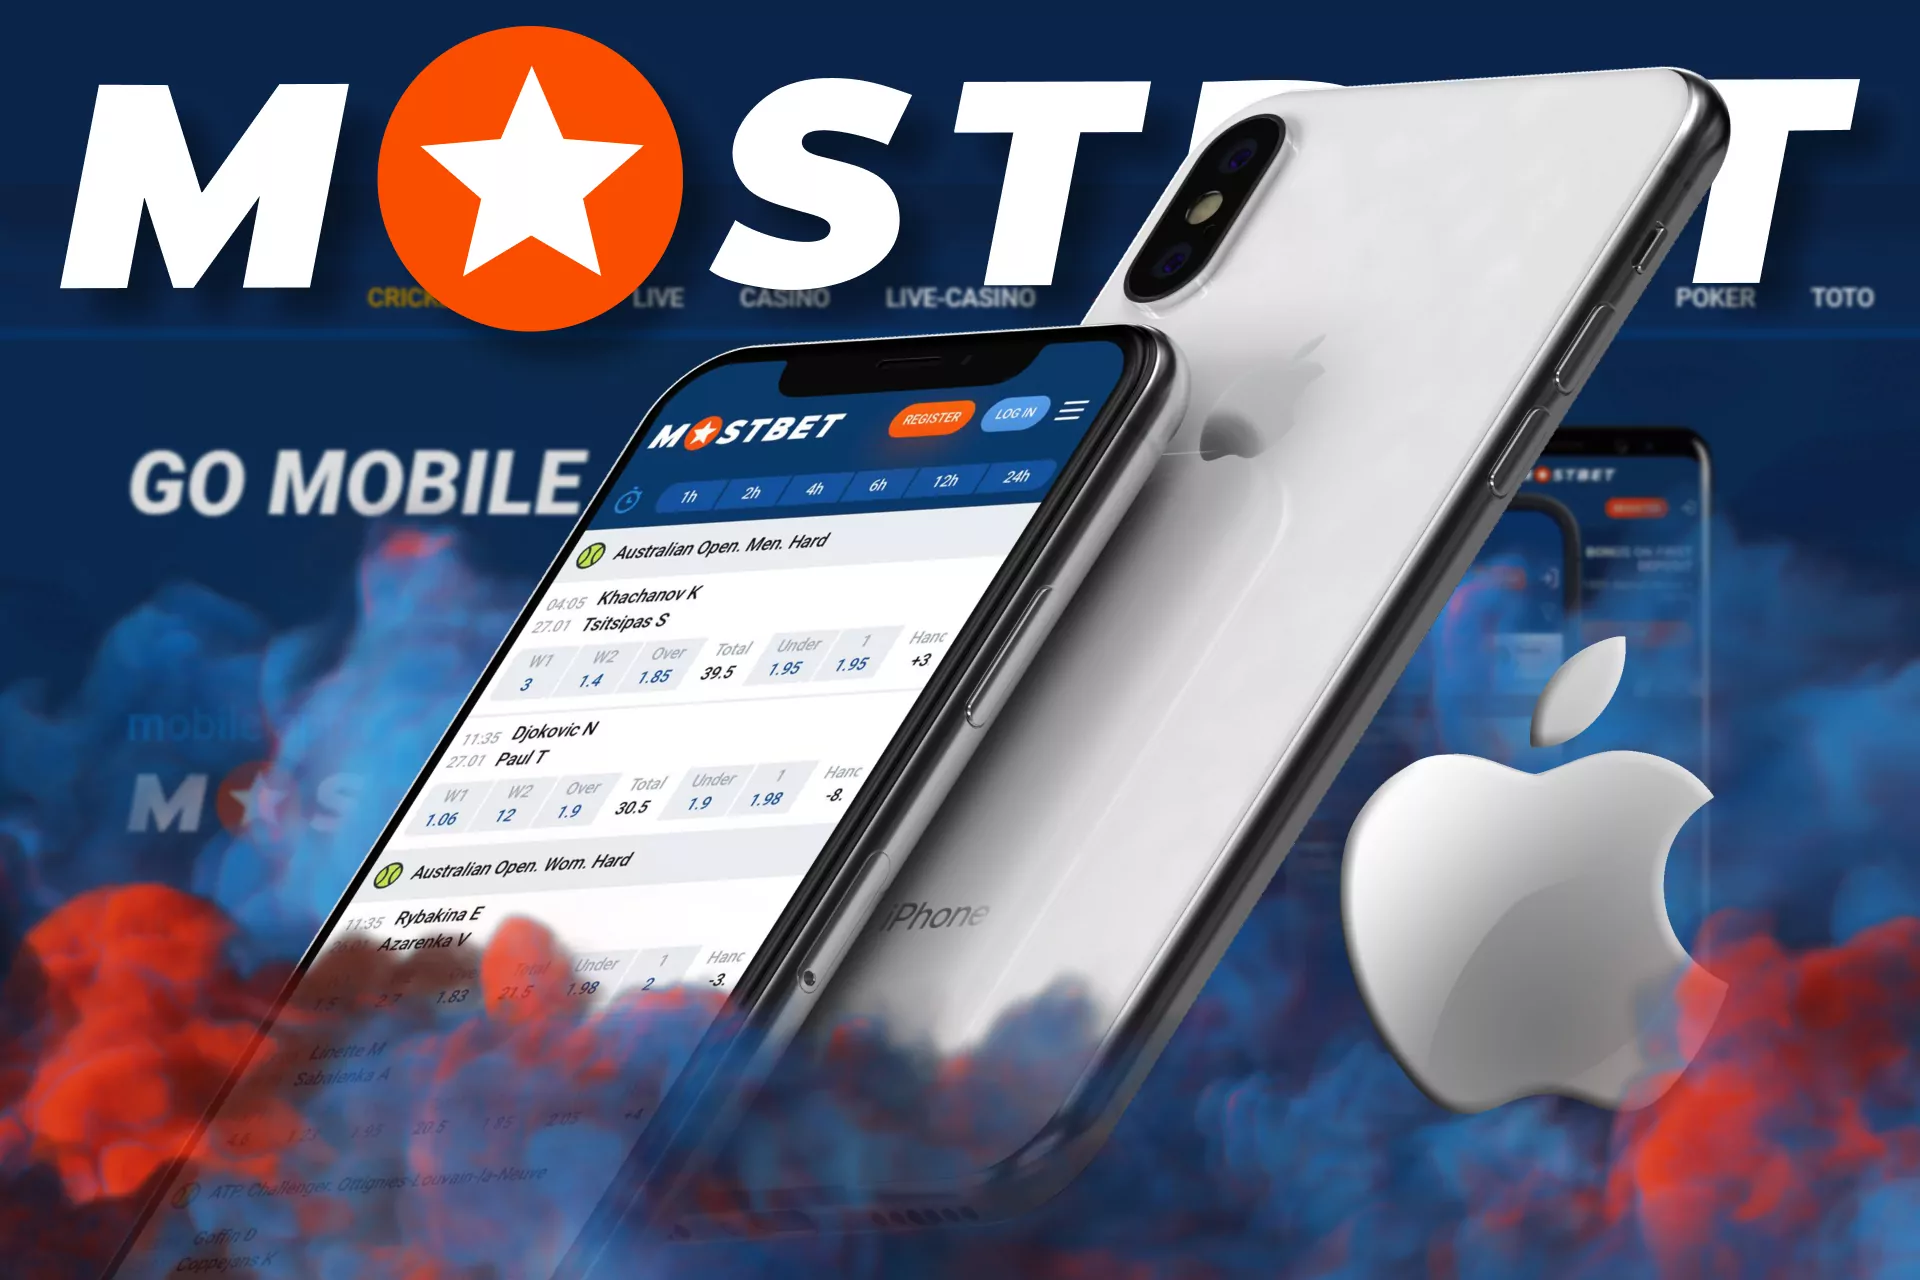 Mostbet has a handy app for iOS where you can bet on tennis.